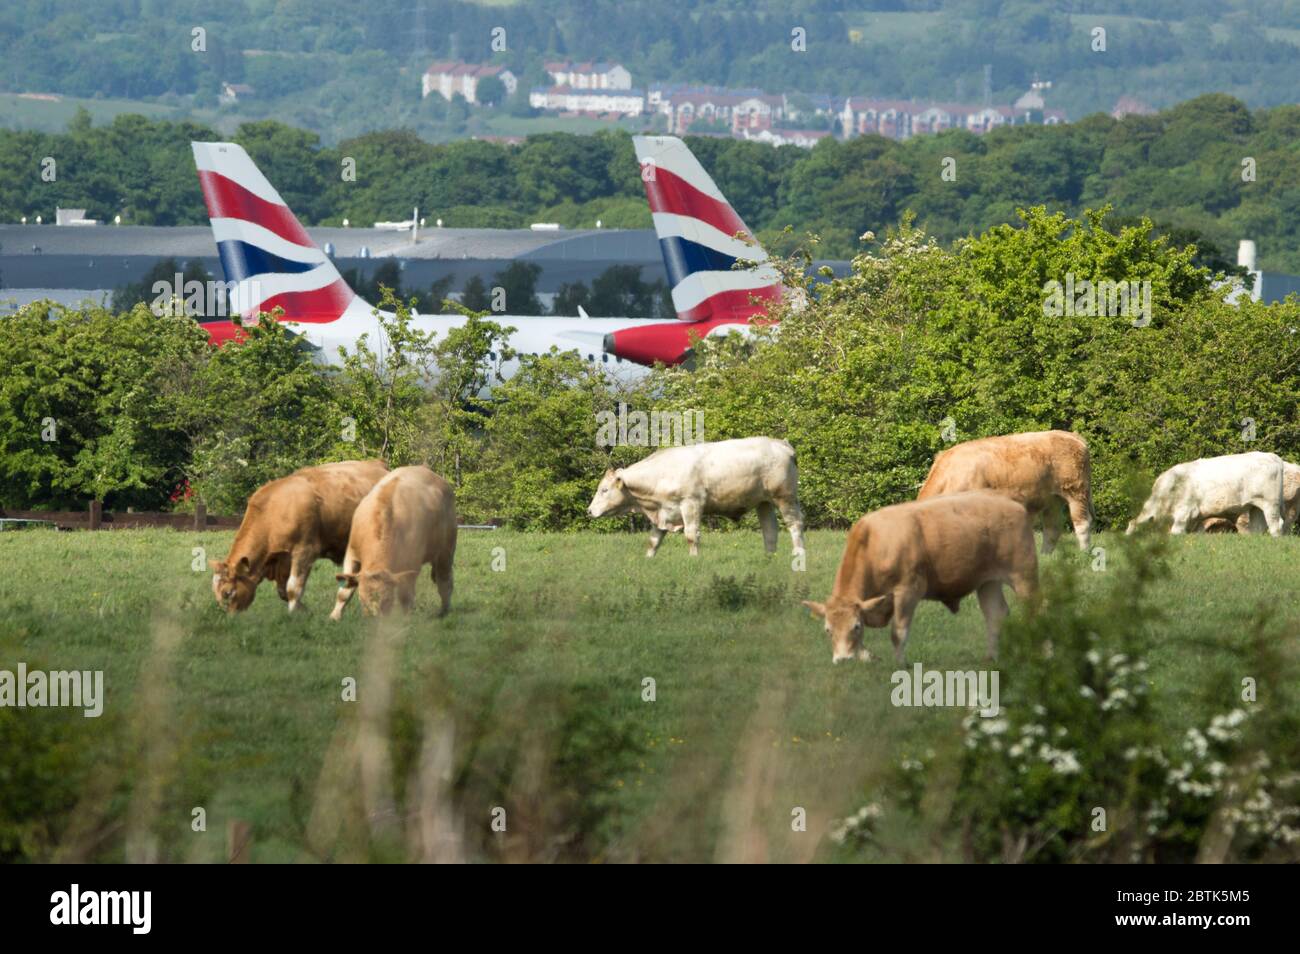 Glasgow, Scotland, UK. 26th May, 2020. Pictured: Cows graze the grassy fields surrounding the airport, with tail fins sticking up in the background of the grounded British Airways Airbus A319/A320/A321 Aircraft seen grounded on the tarmac due to the coronavirus (COVID19) crisis which has put massive financial pressures on the global aviation industry, where BA have cut over 12,000 staff. Credit: Colin Fisher/Alamy Live News Stock Photo